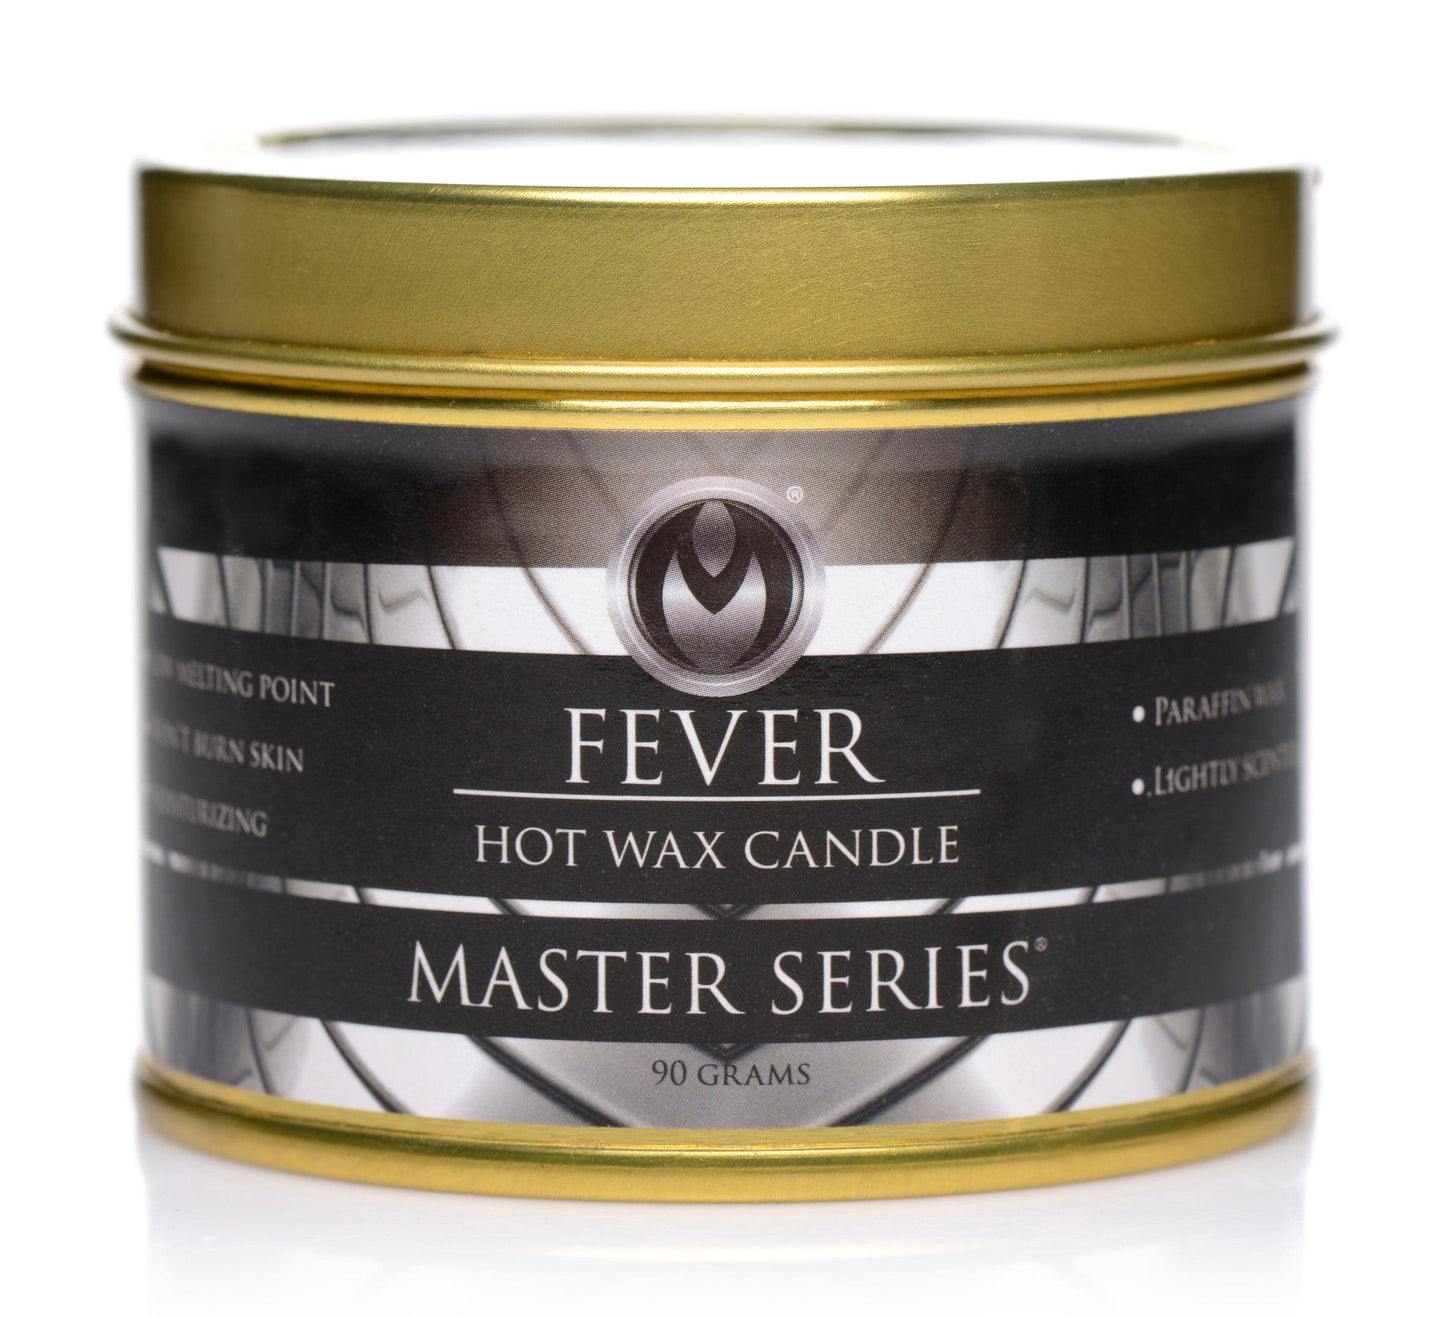 Master Series Dripping Candle Fever Hot Wax Candle - Blue at the Haus of Shag